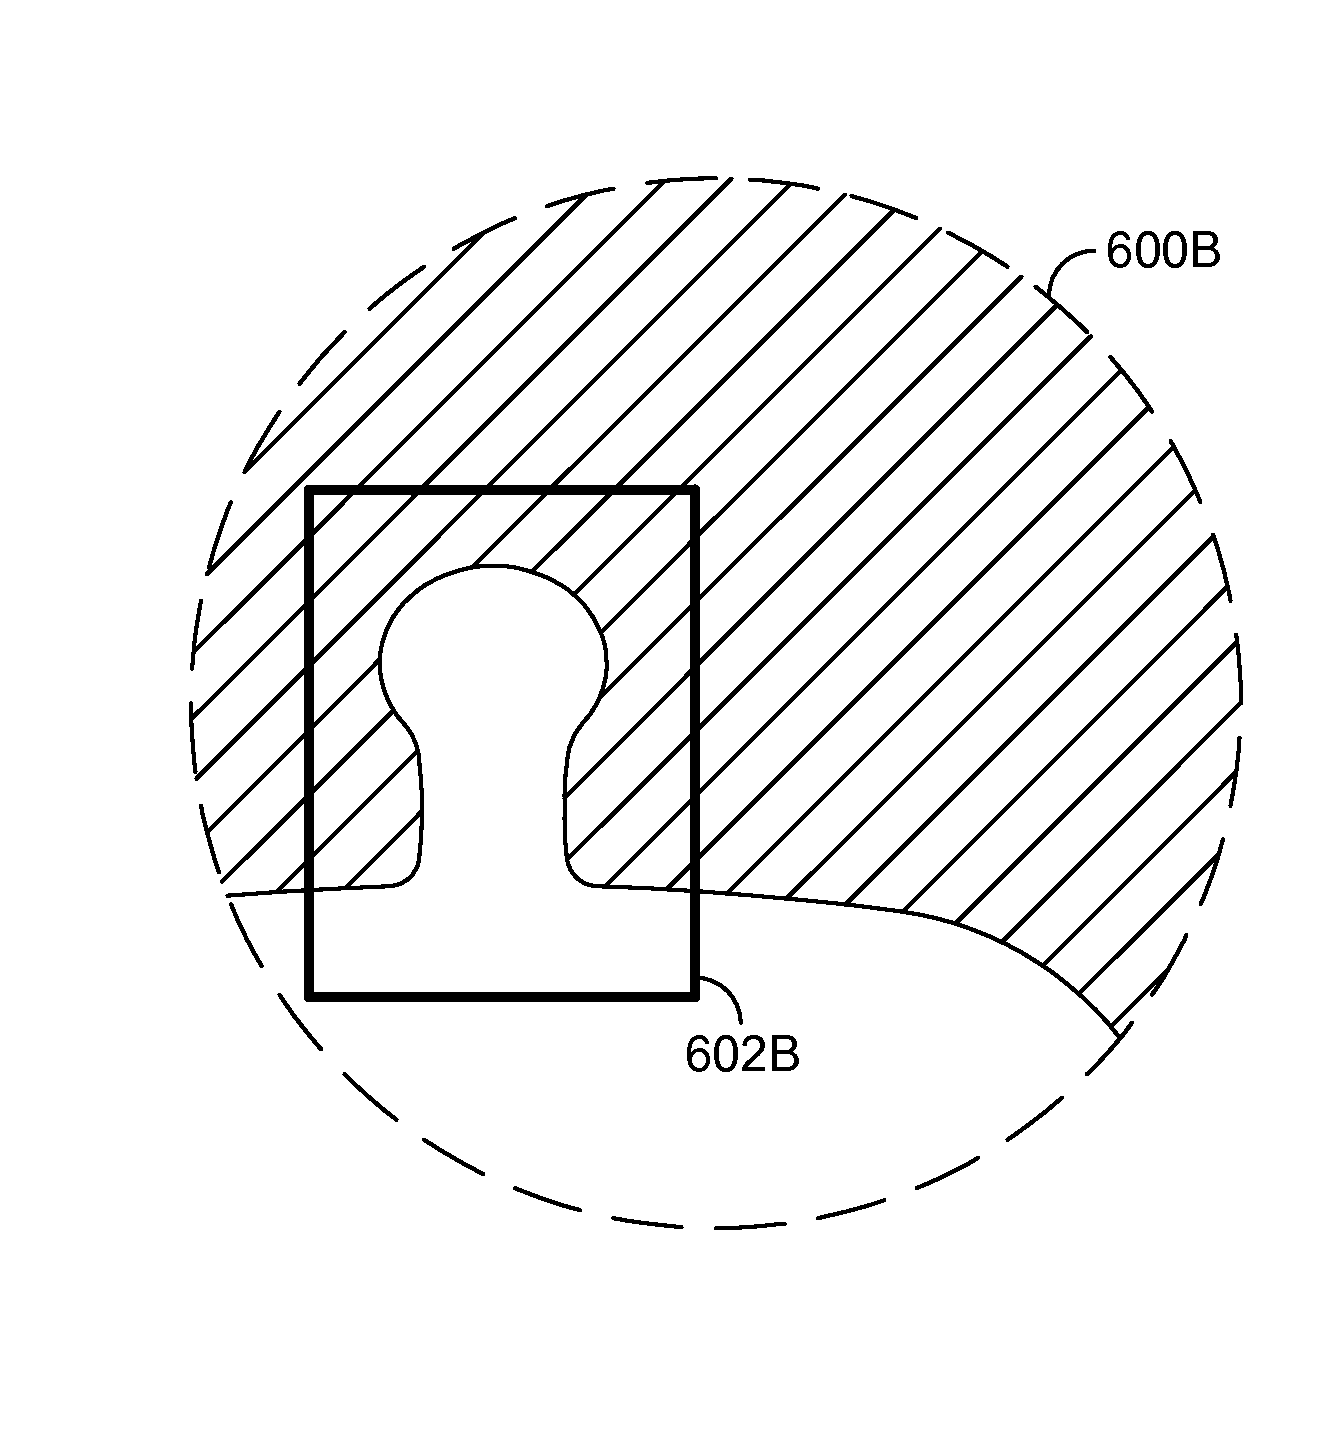 Lesion detection and image stabilization using portion of field of view